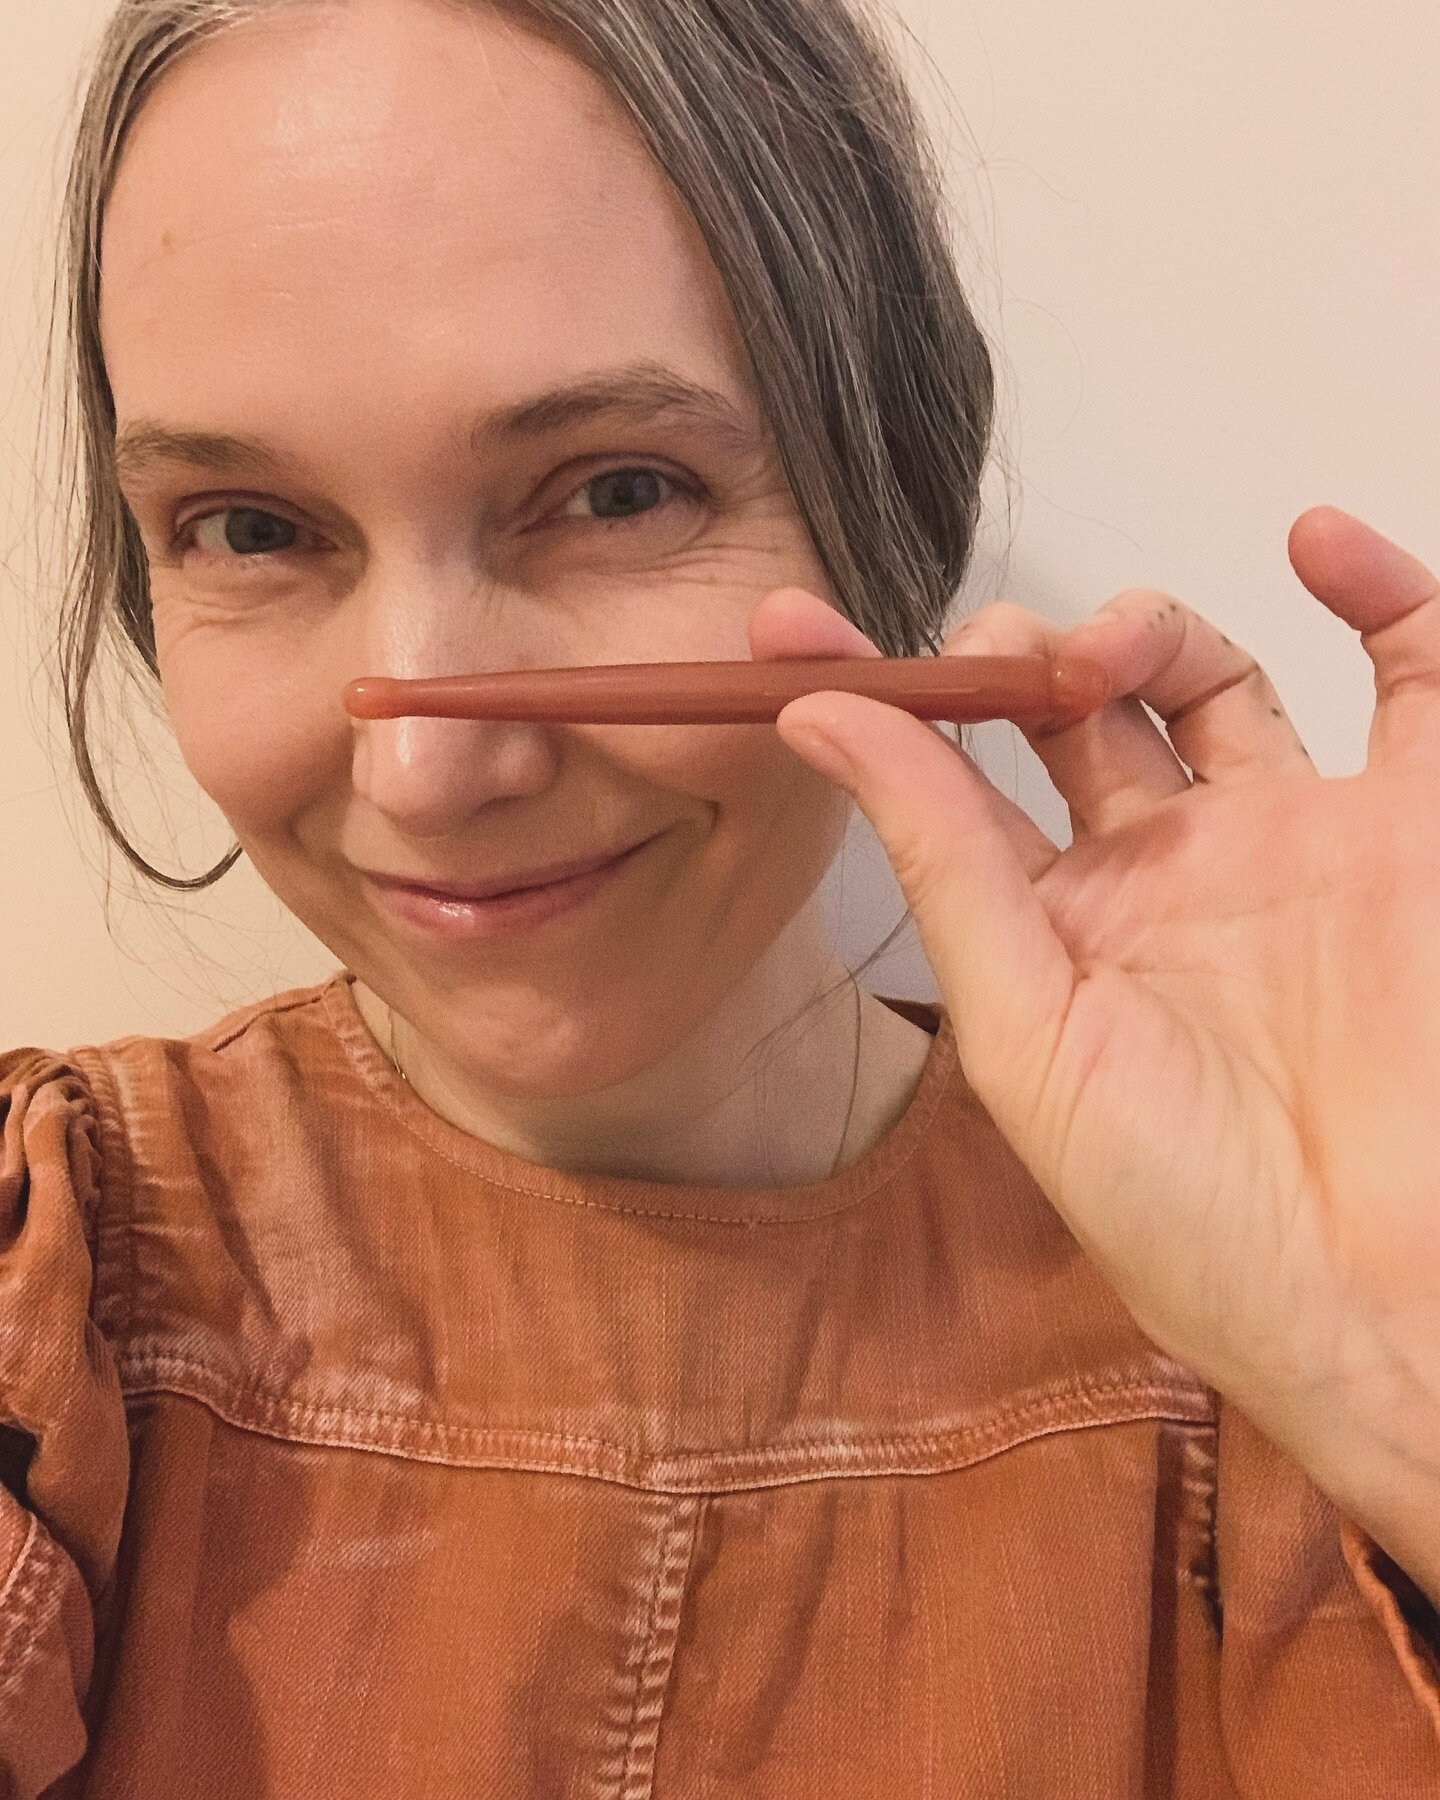 Accidentally matching my reflexology tool 🧡

I took a facial reflexology training with Helen Black of @mirrormedicine back in 2018 and love weaving this modality into my sessions. There&rsquo;s nothing quite like facial reflexology for dropping peop